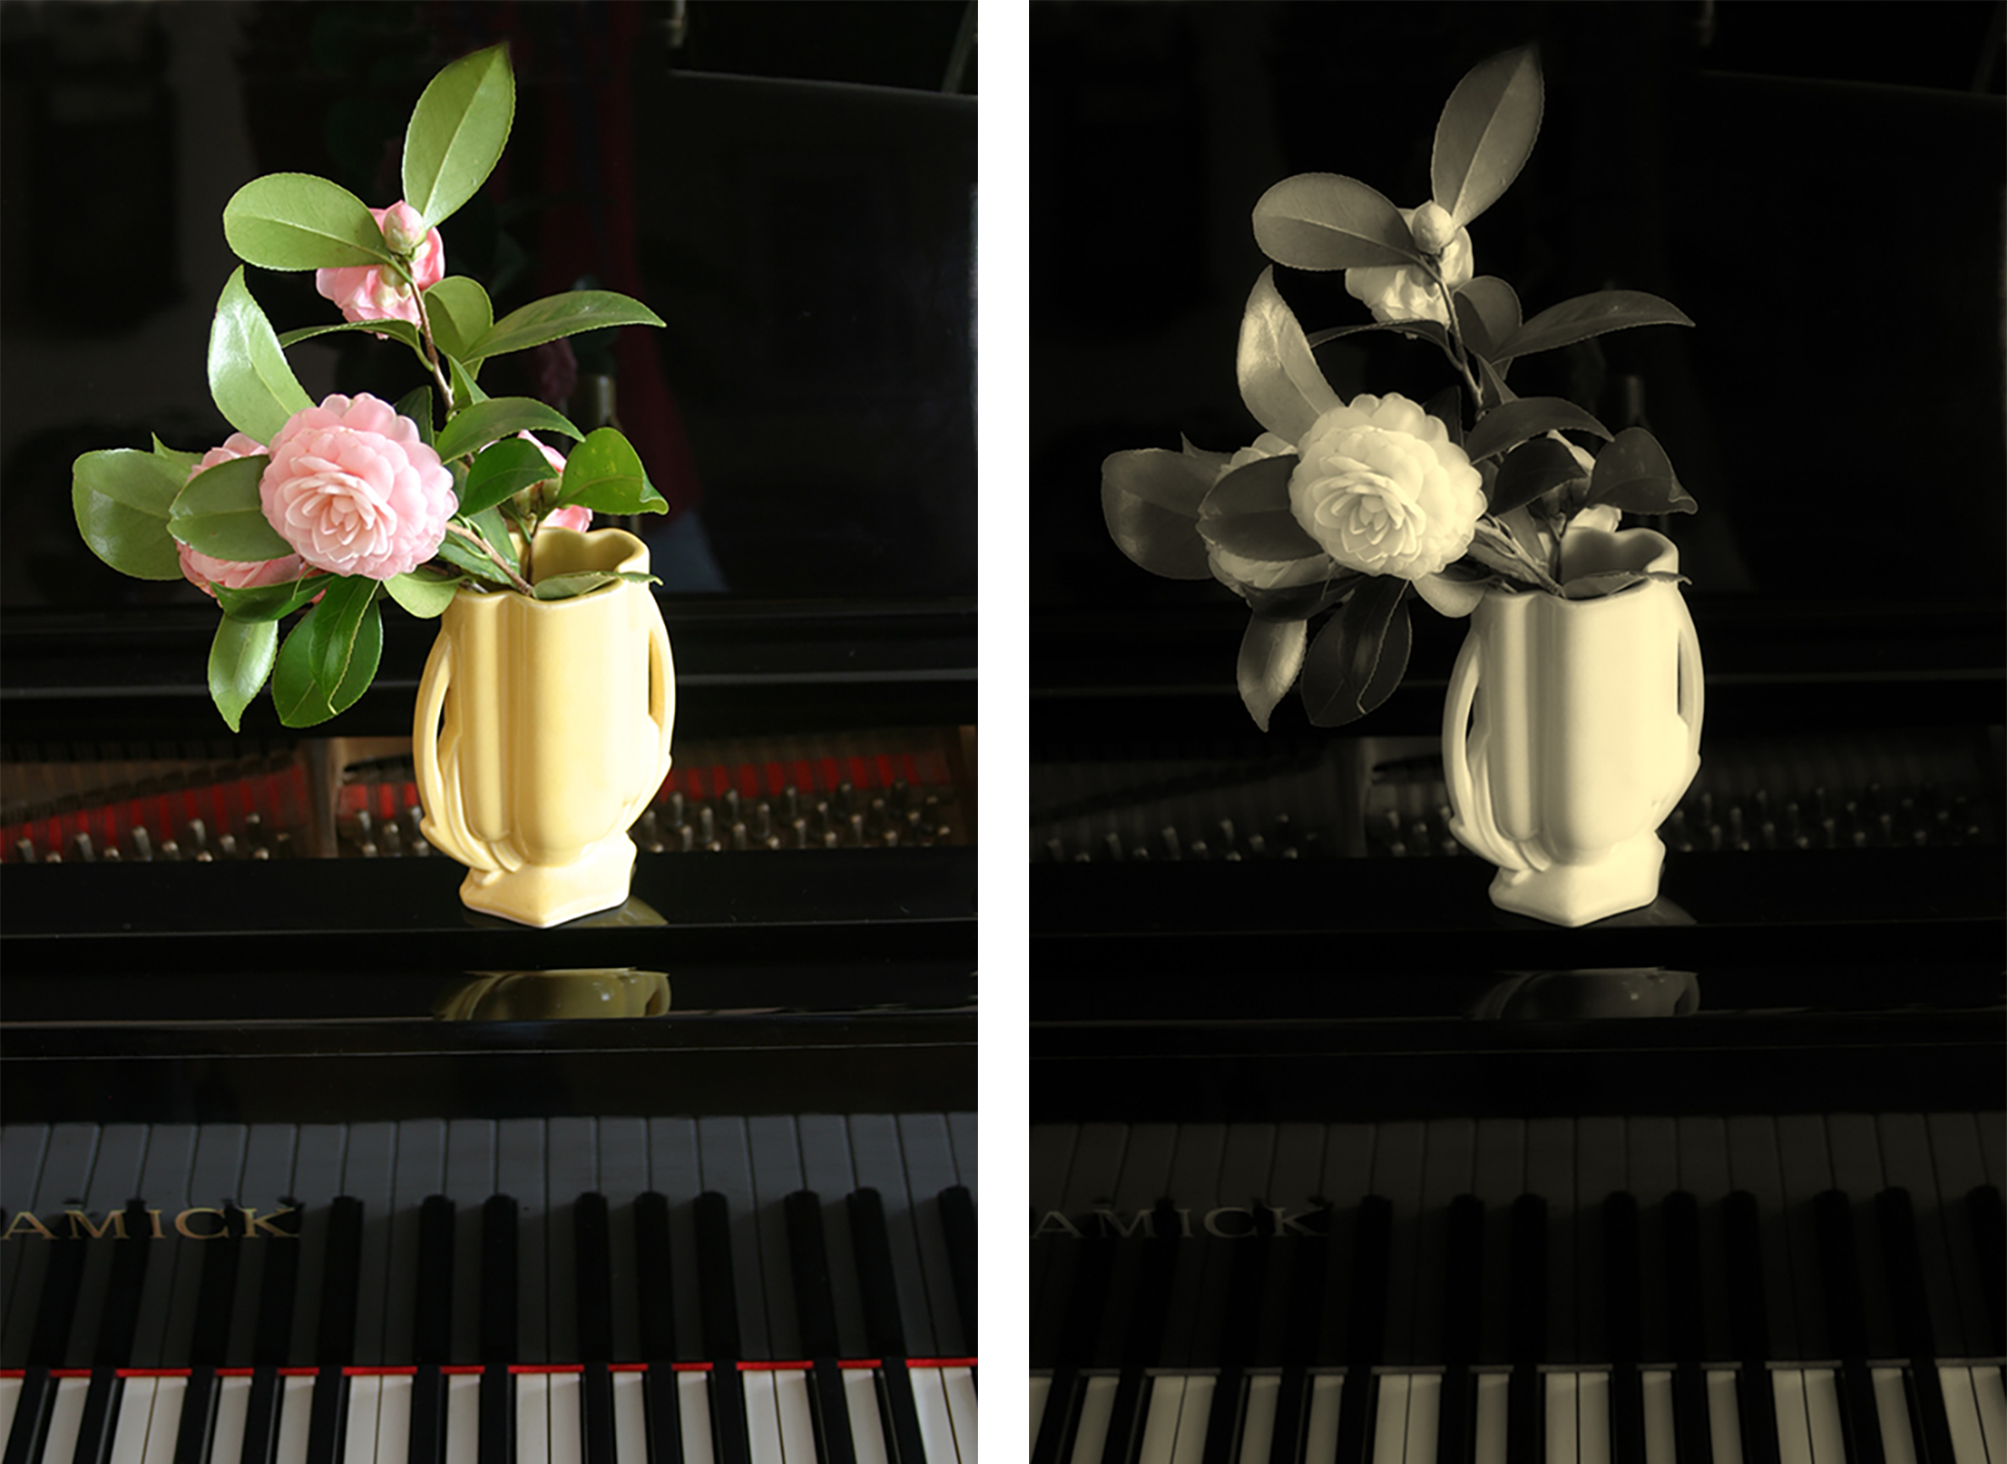 Side by side images of a few pink circular flowers in a light yellow handled vase on the left and the black and white version on the right